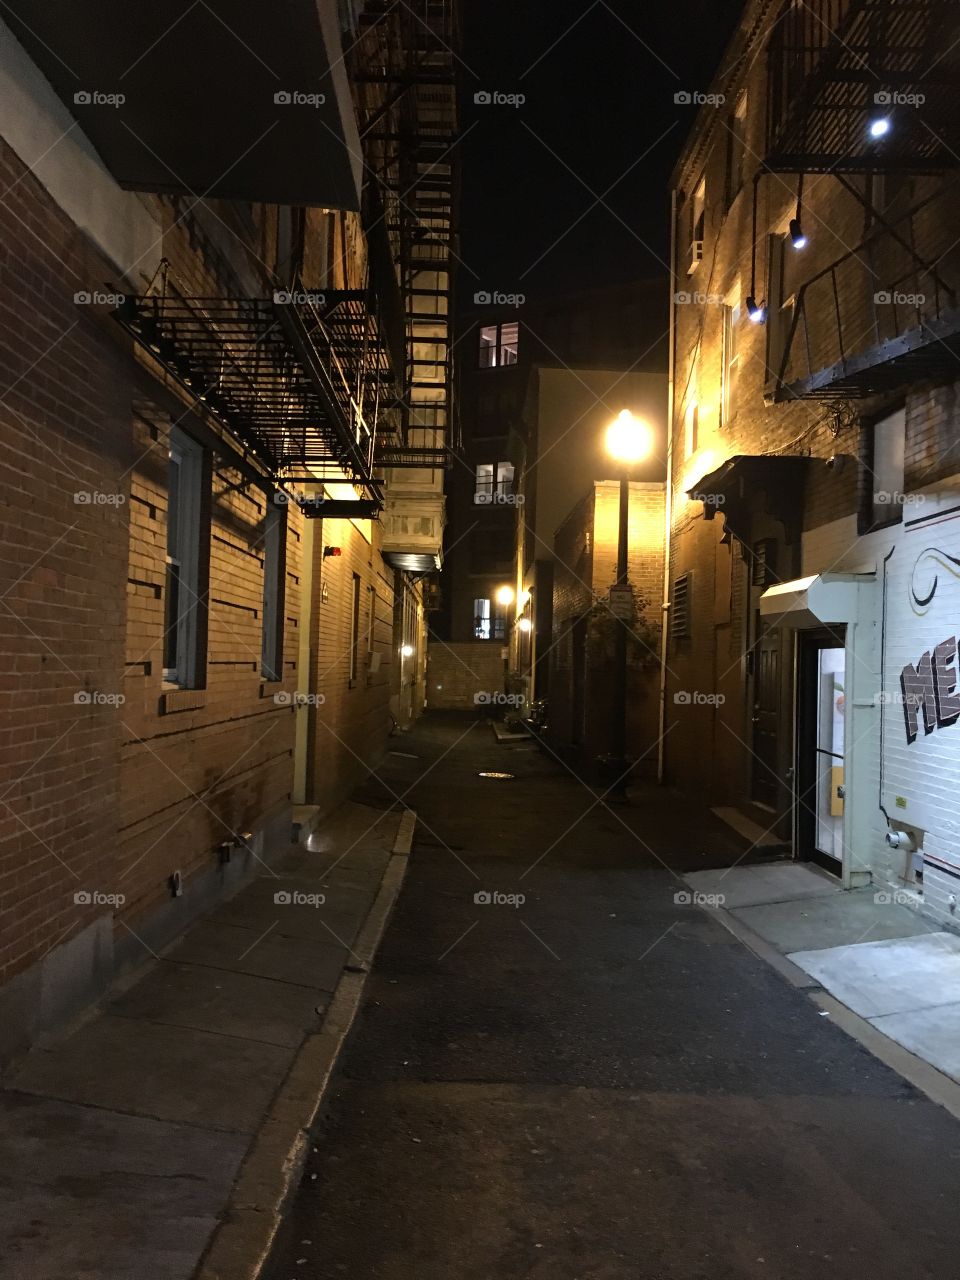 Alley in Boston at night